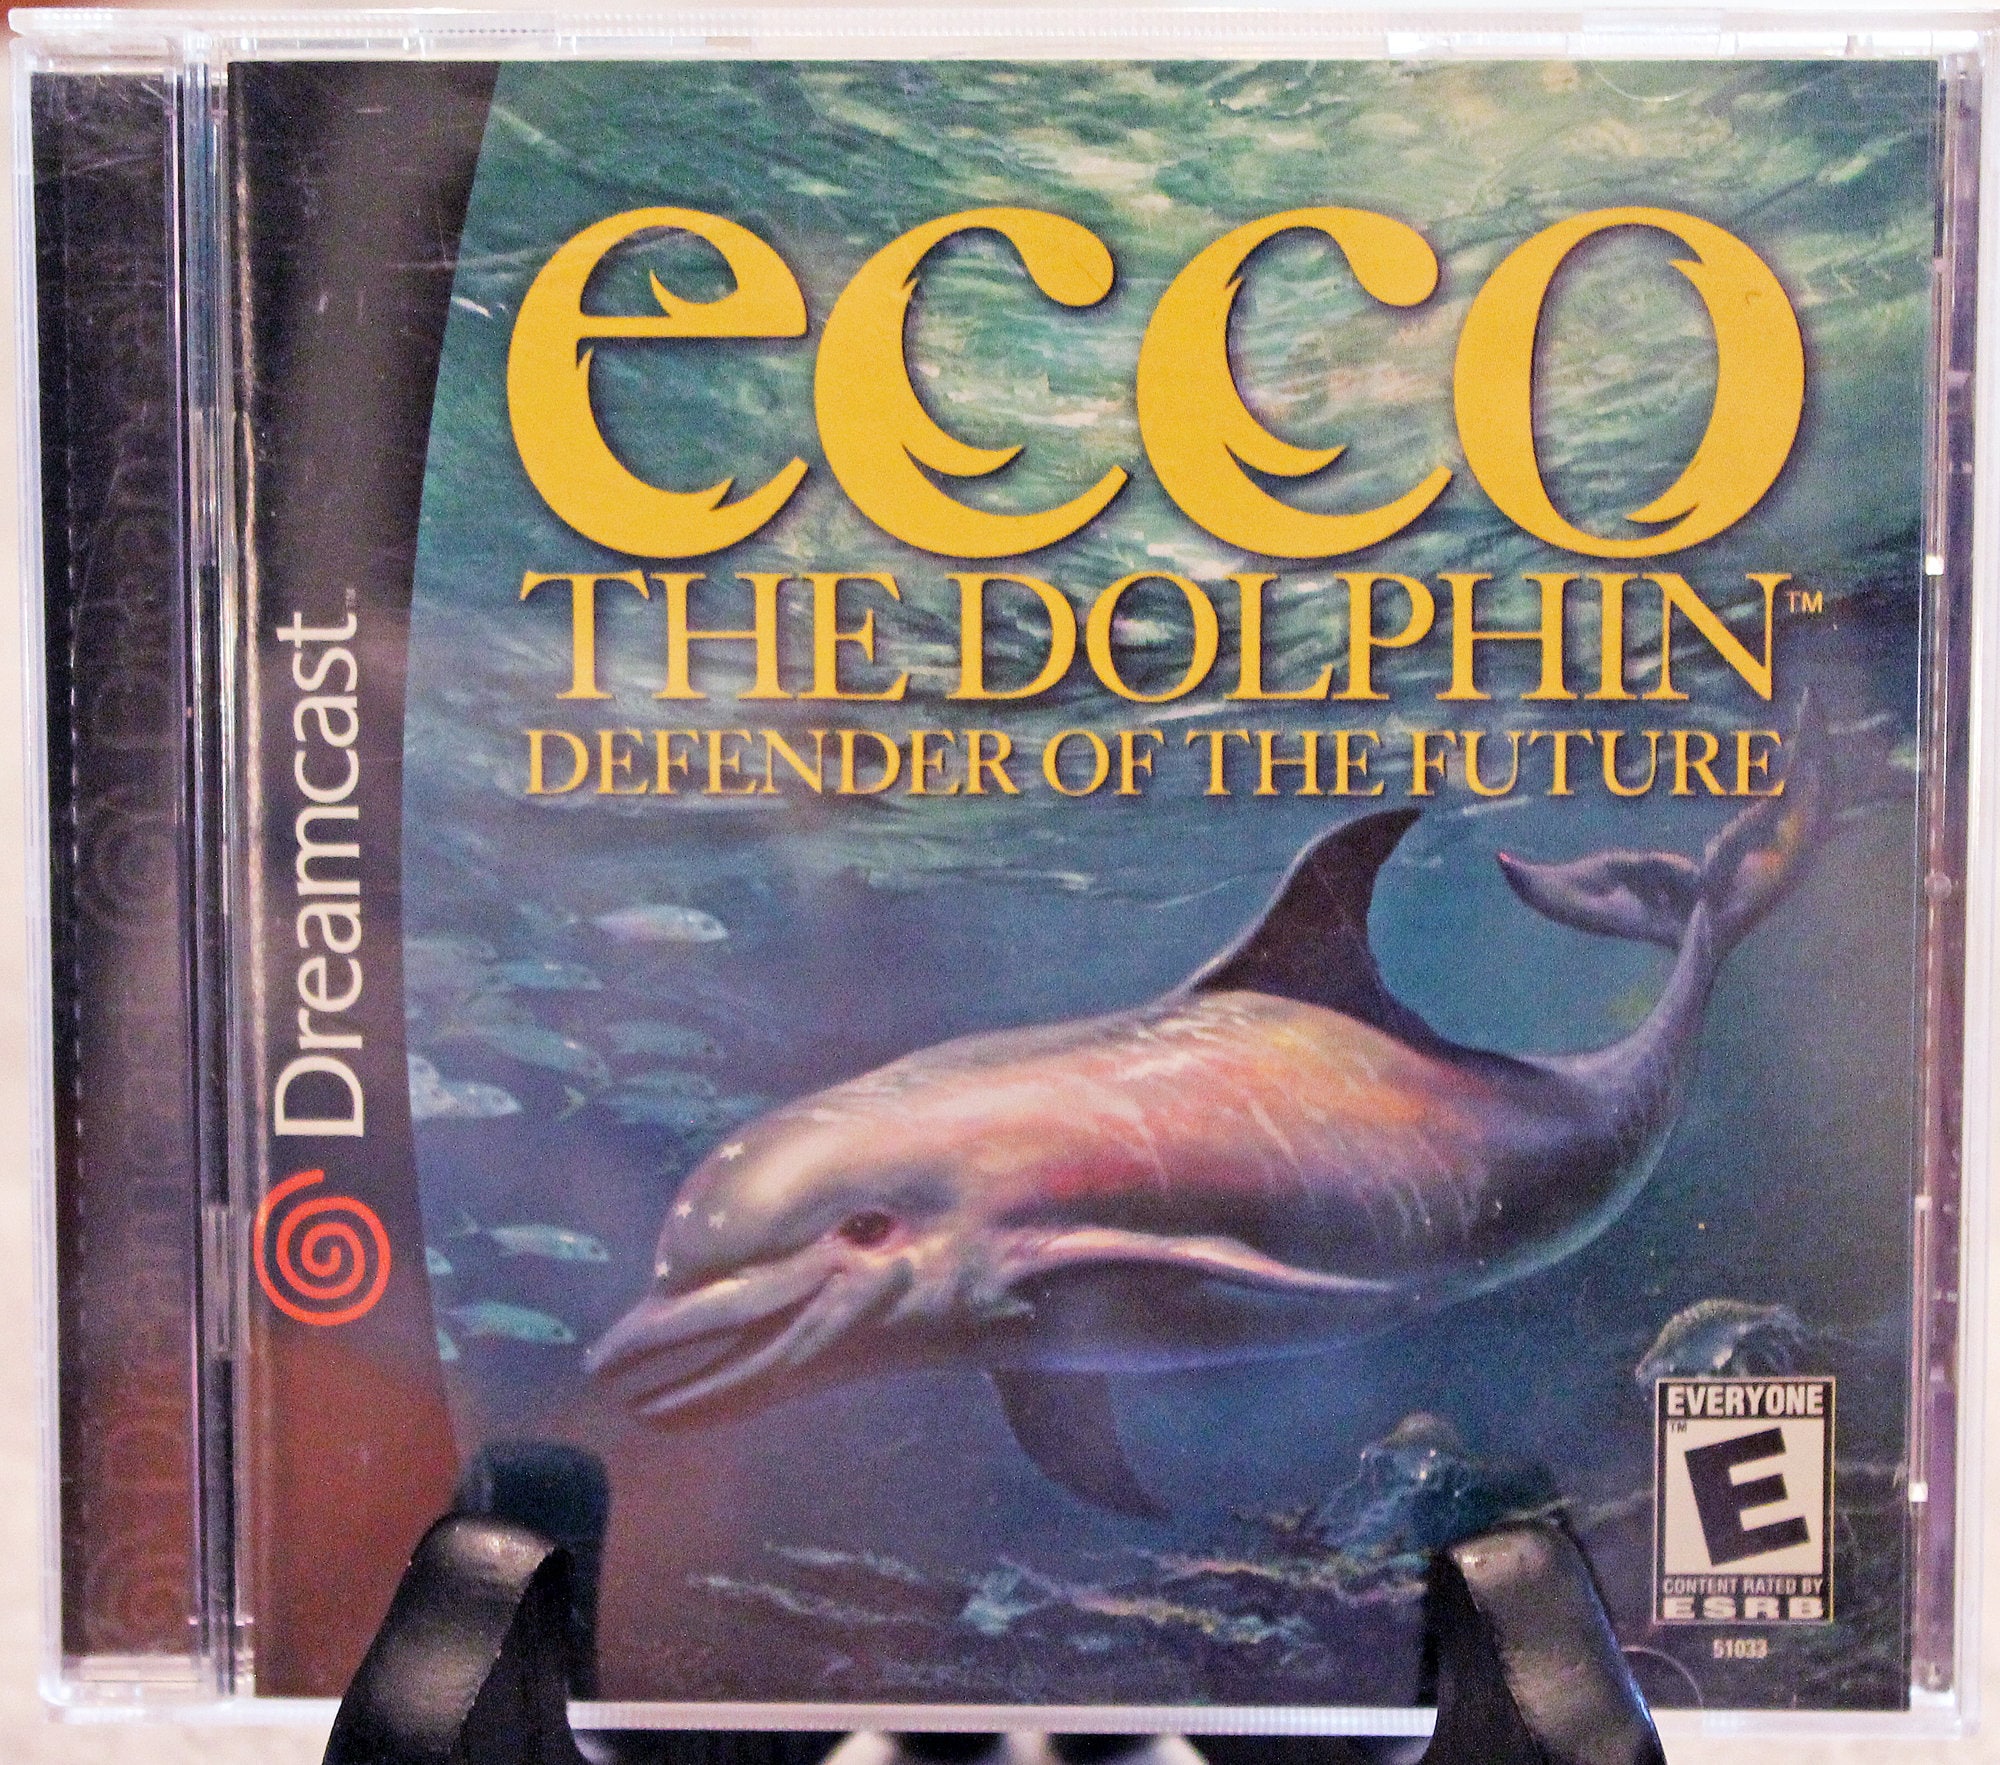 Kammer Juster cabriolet Dreamcast Ecco The Dolphin Defender of the Future/Sega Video - Etsy 日本